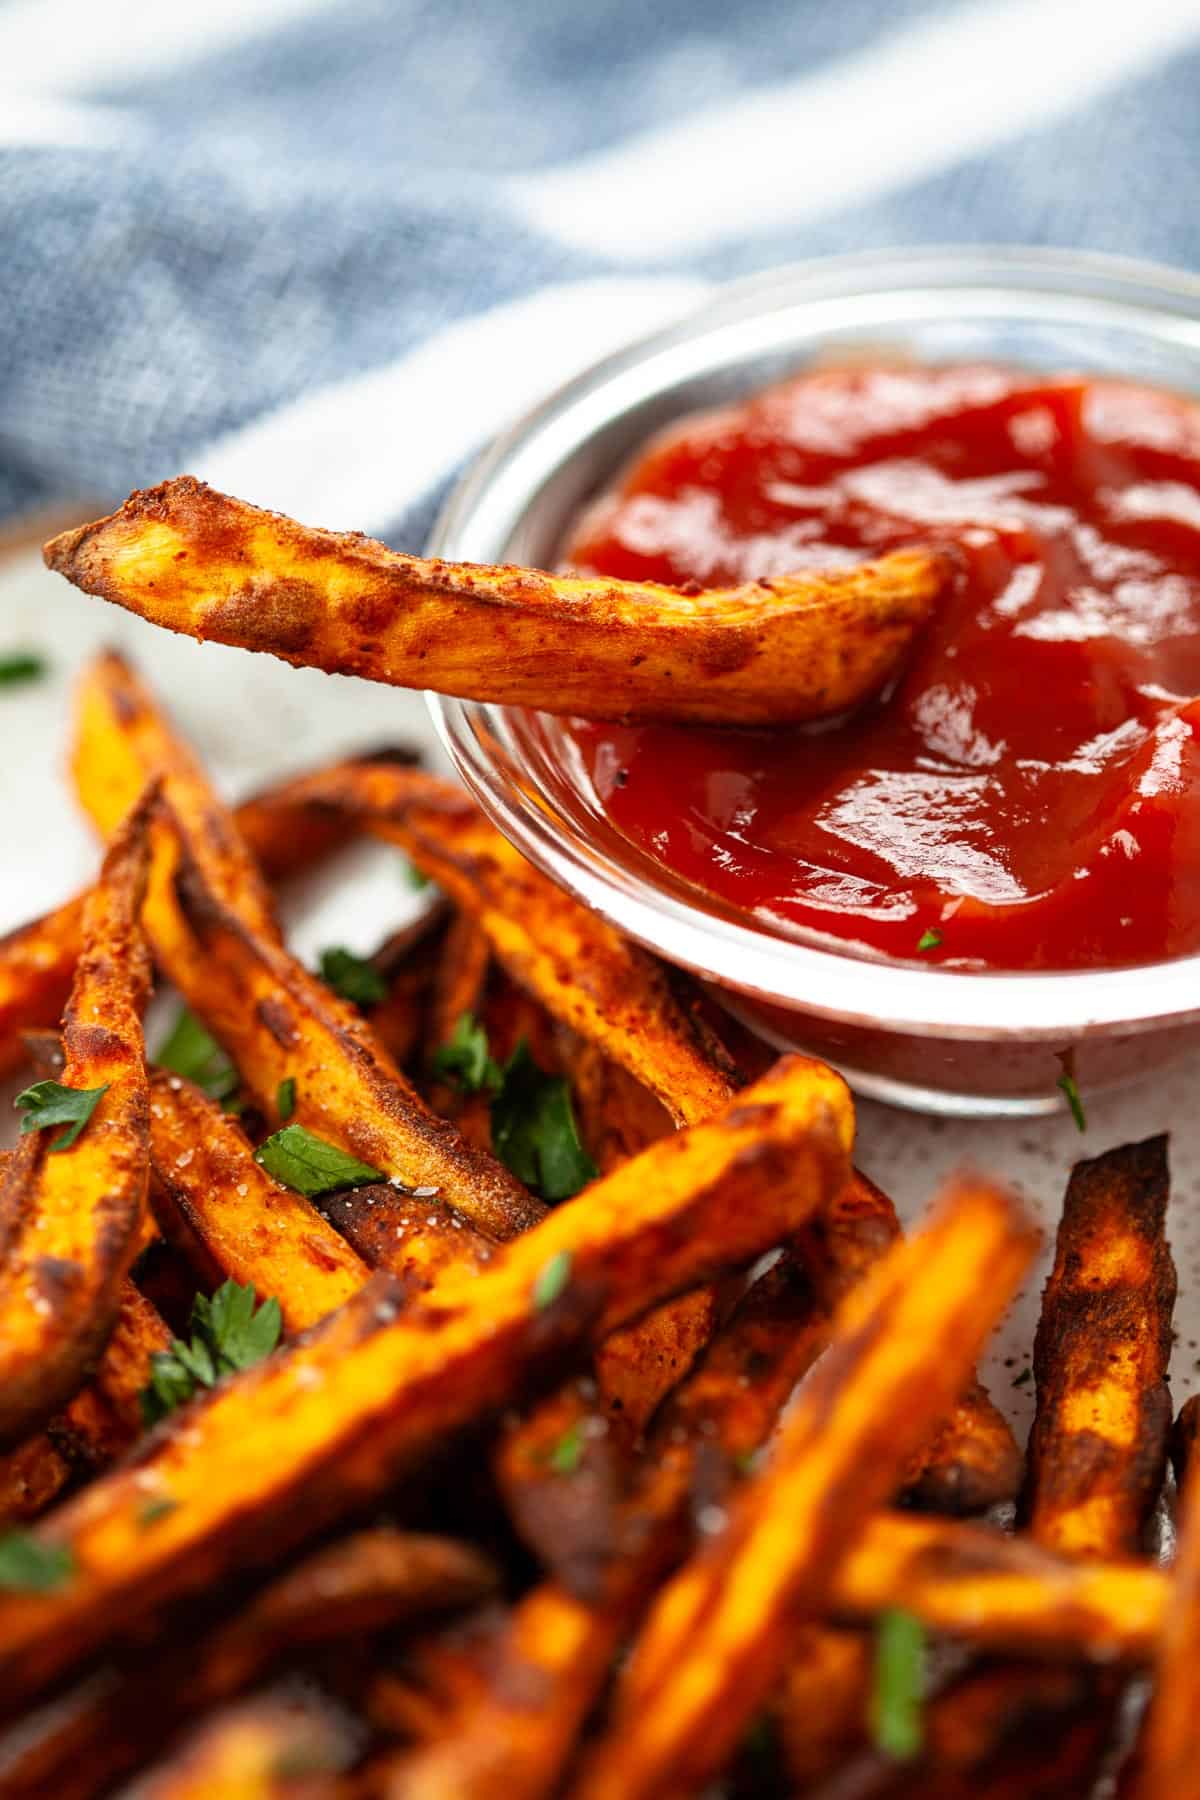 air fryer sweet potato fries dipping fry into side of ketchup dipped fry in ketchup